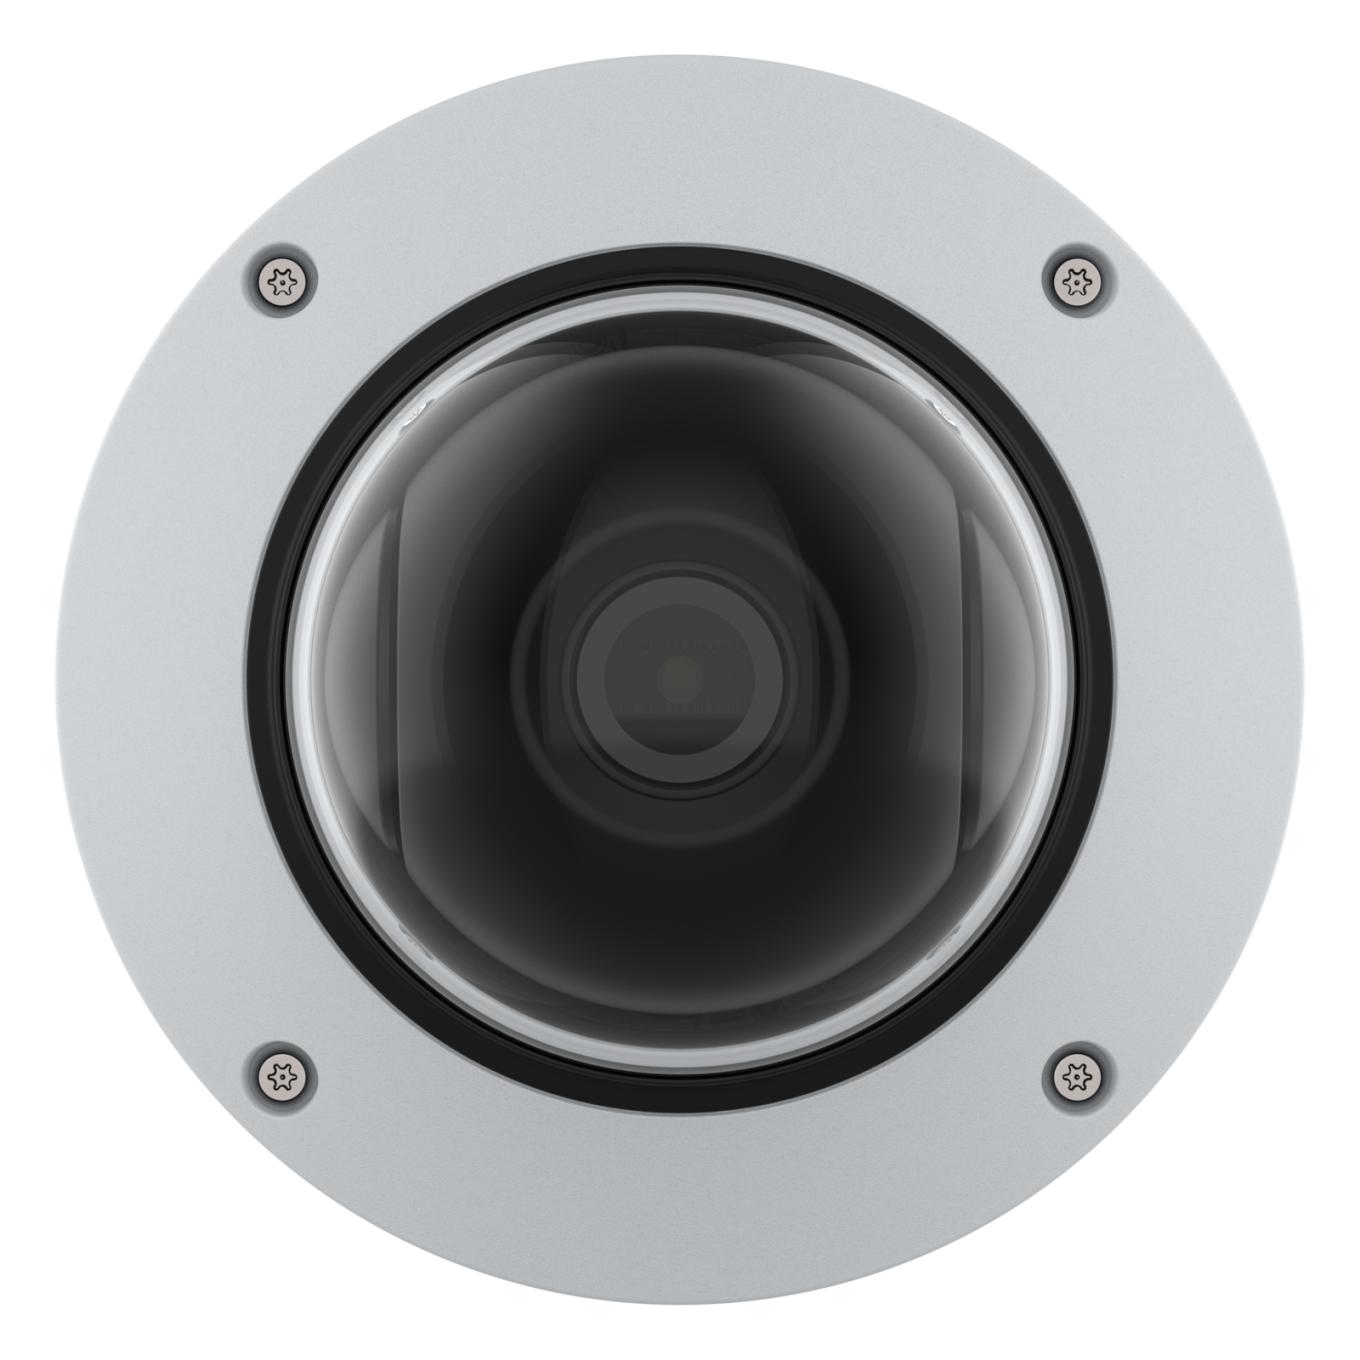 AXIS Q3626-VE Dome Camera | Axis Communications